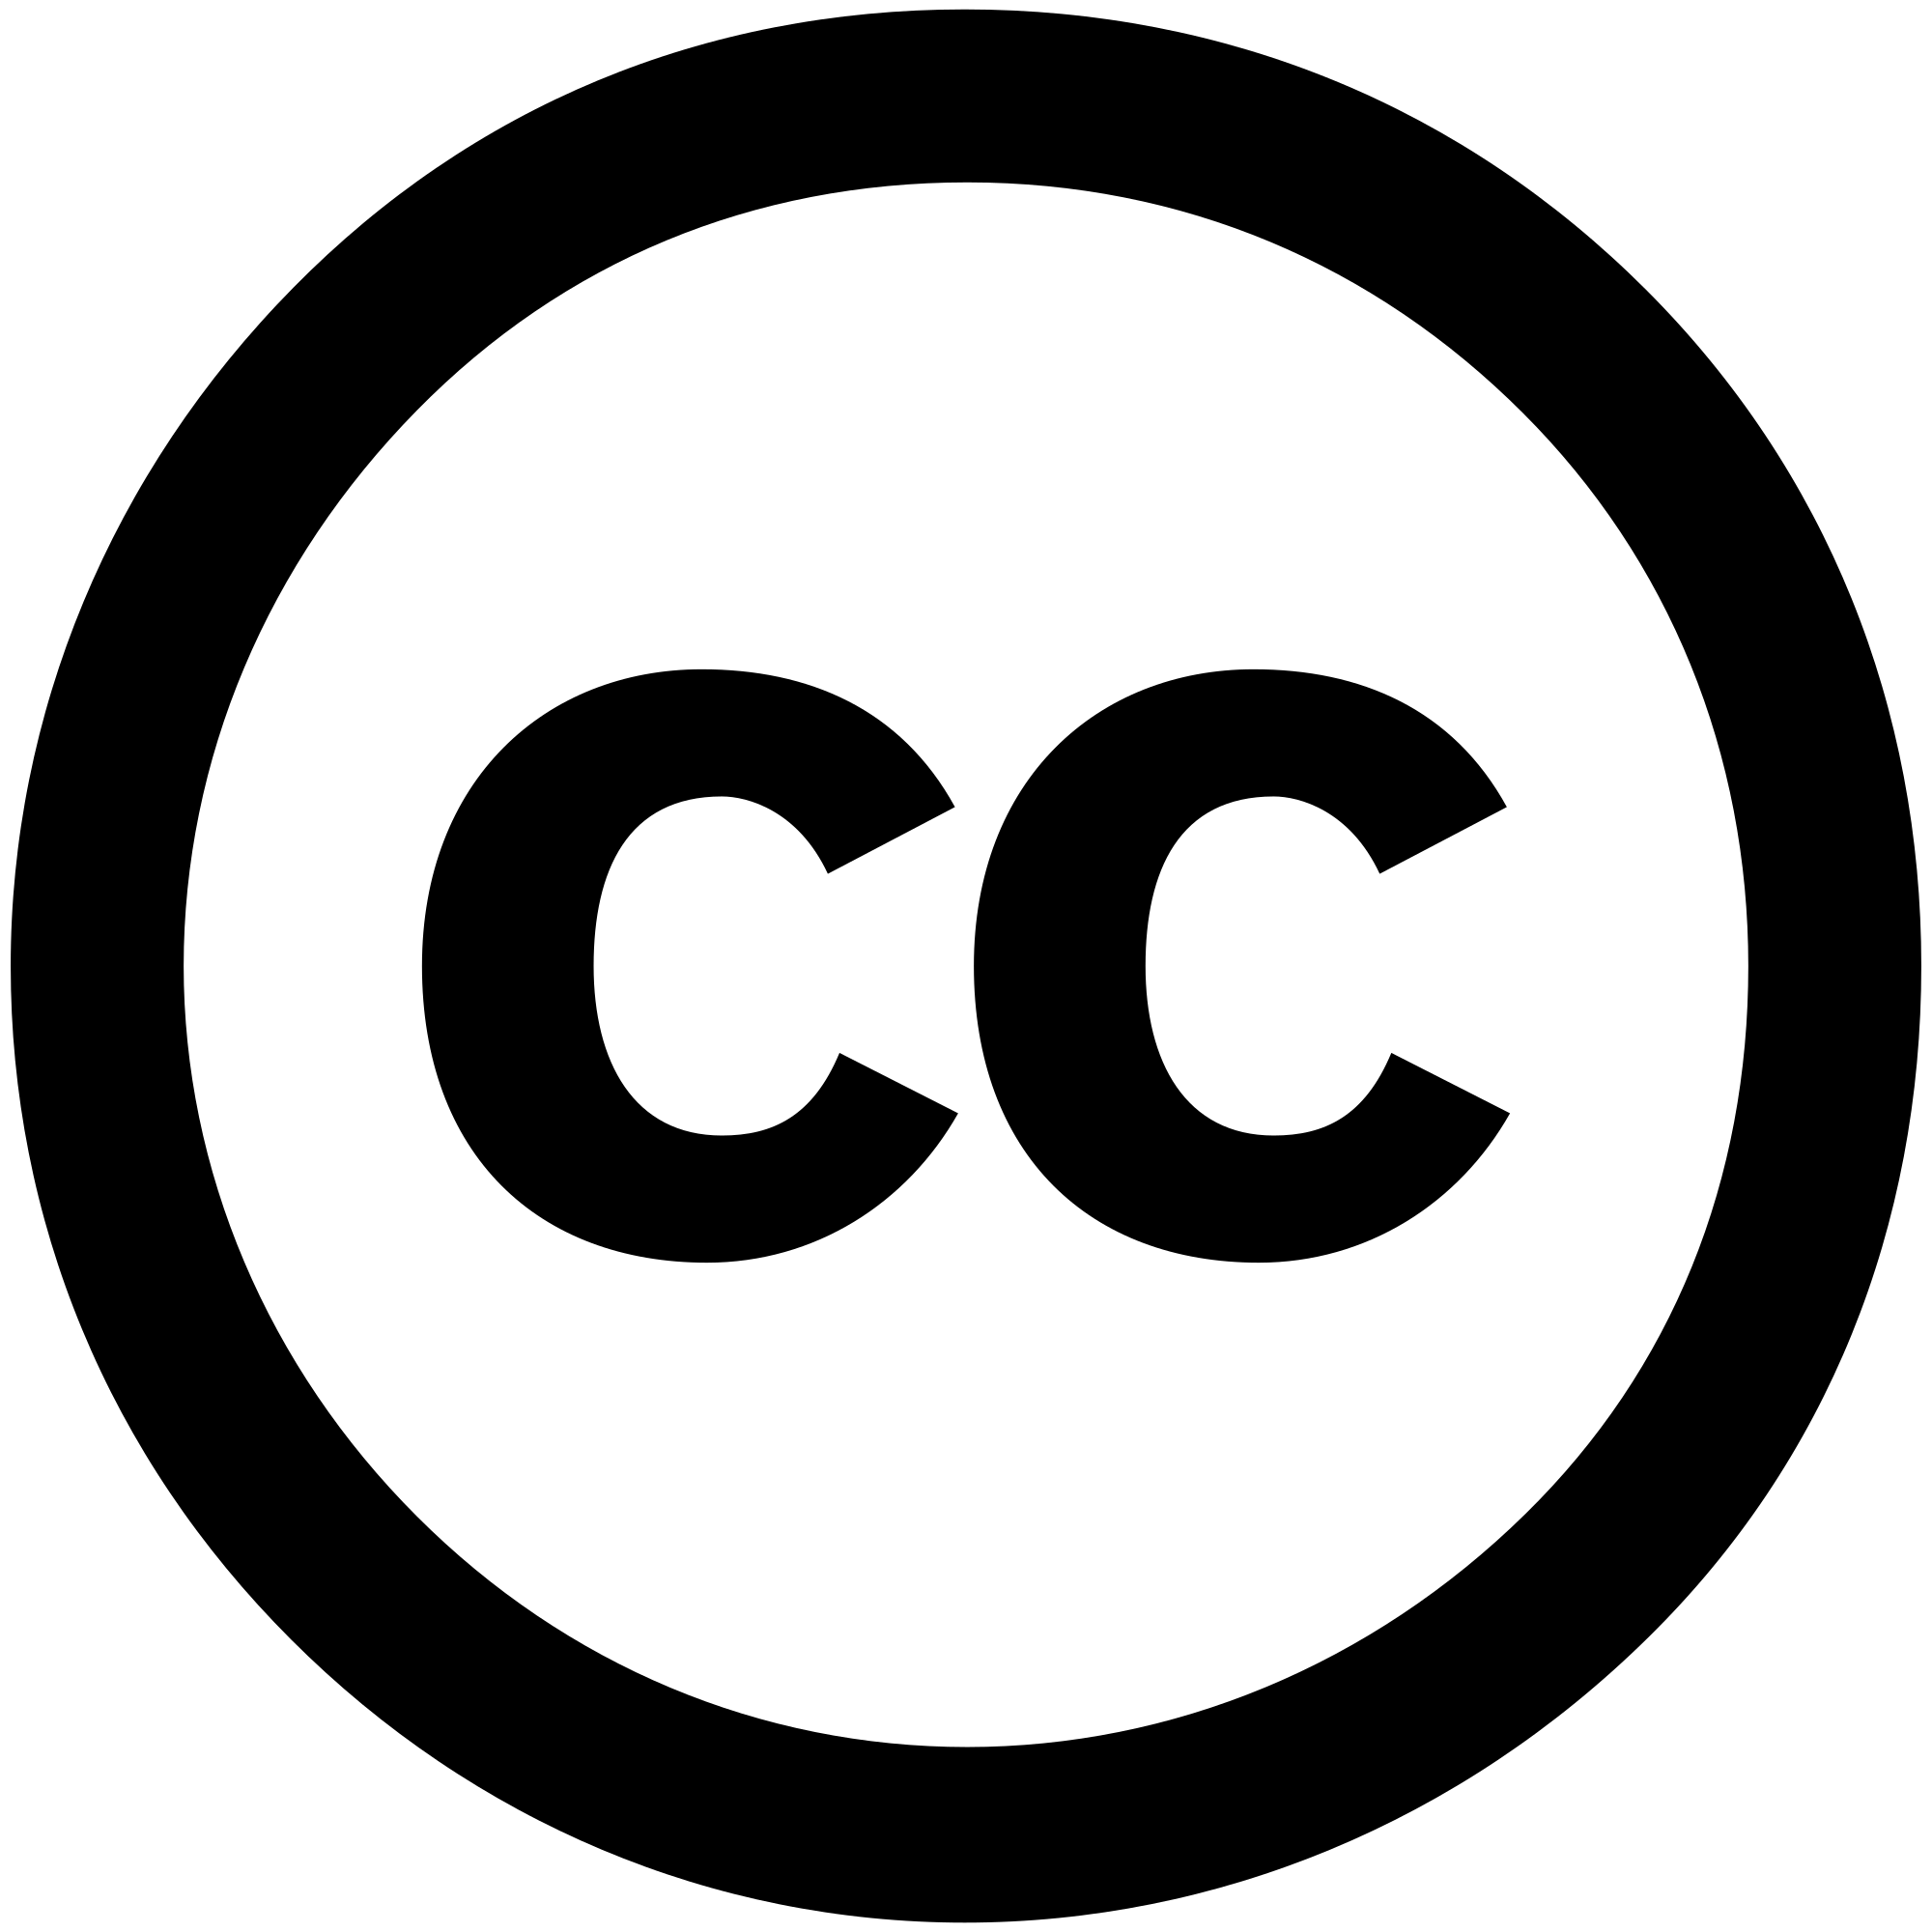 What CC Logo - Creative Commons license